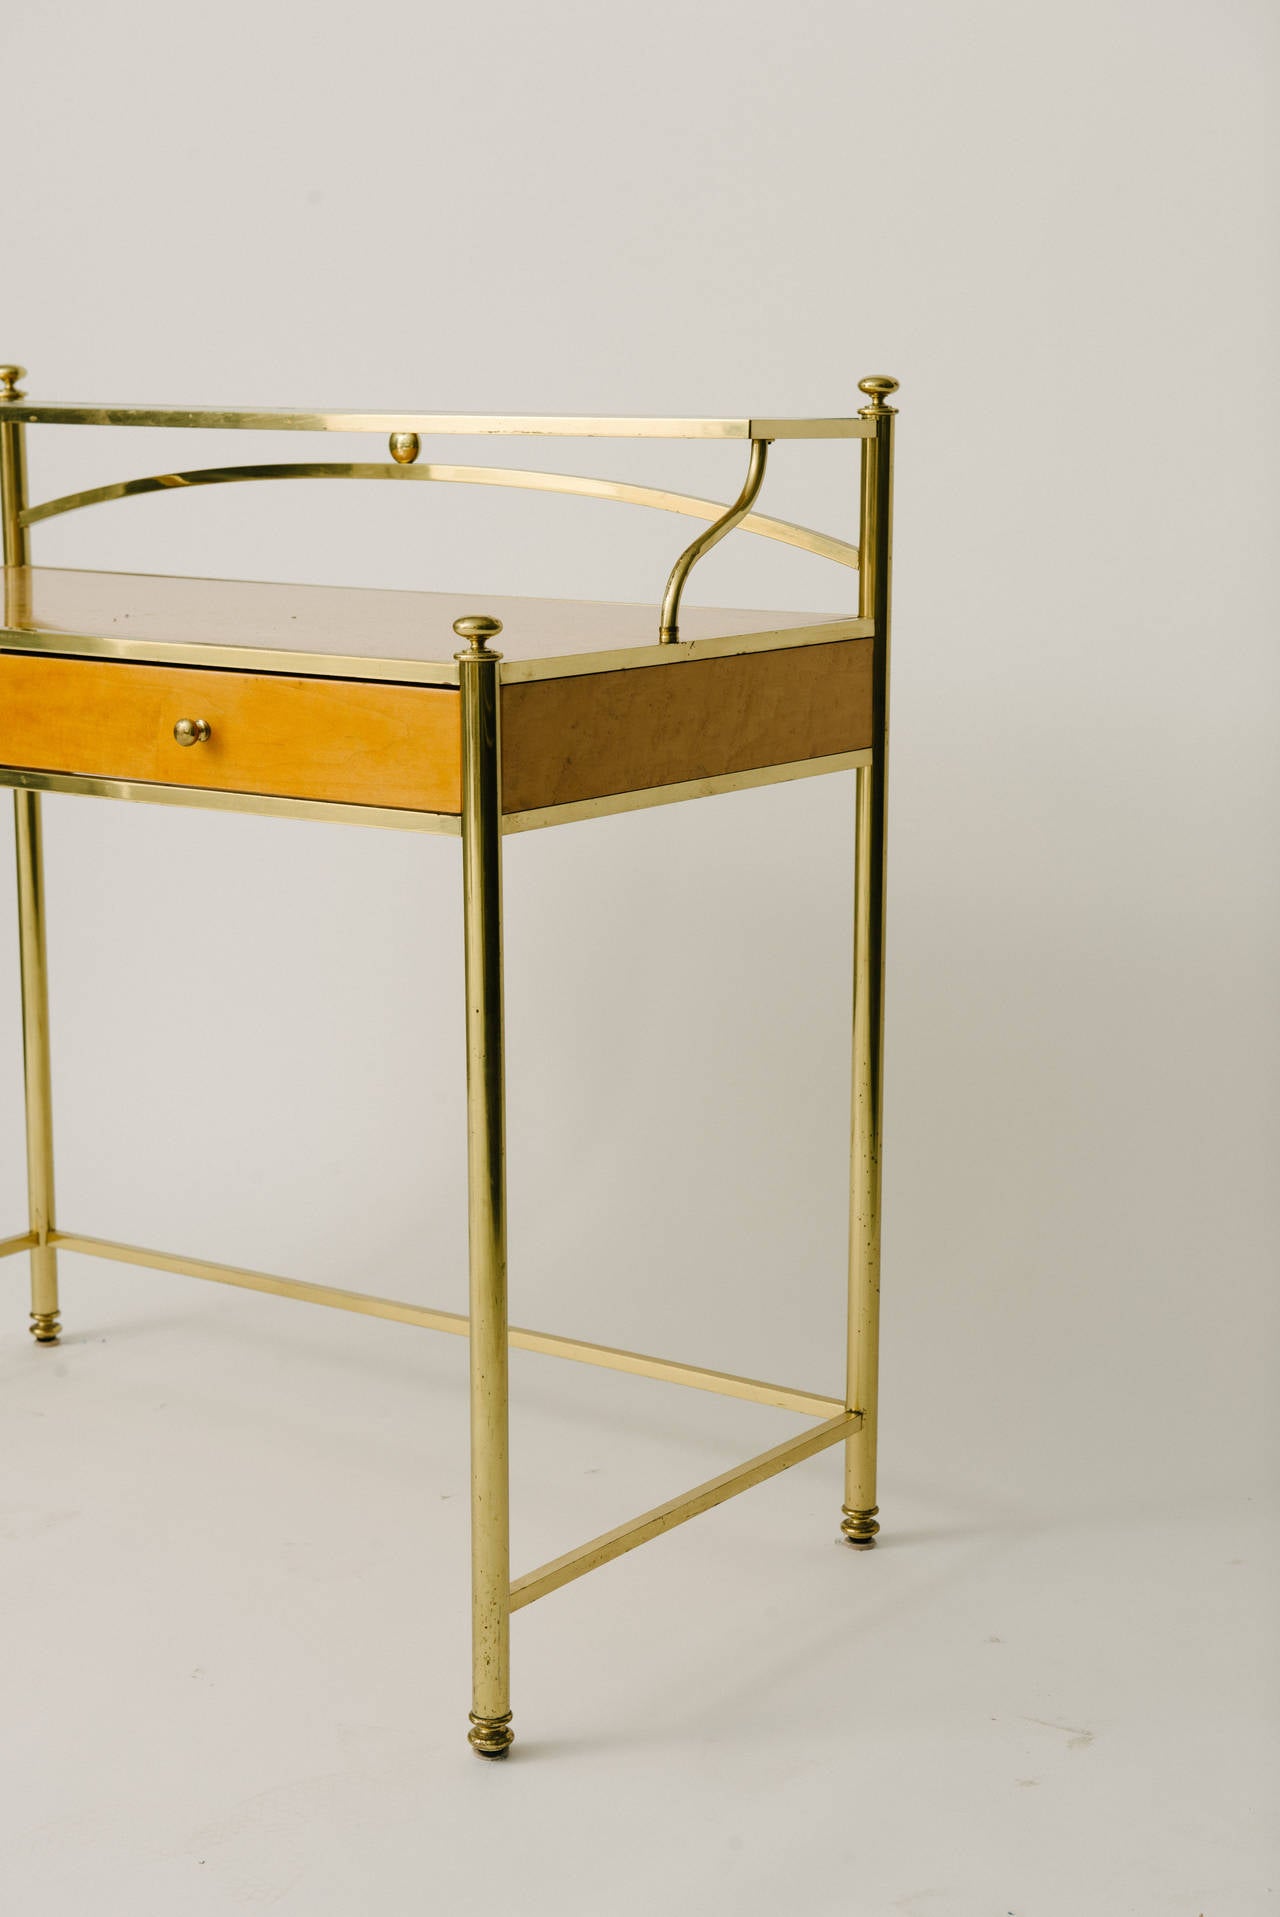 Vintage French vanity with gilt brass frame, glass shelf and two drawers.